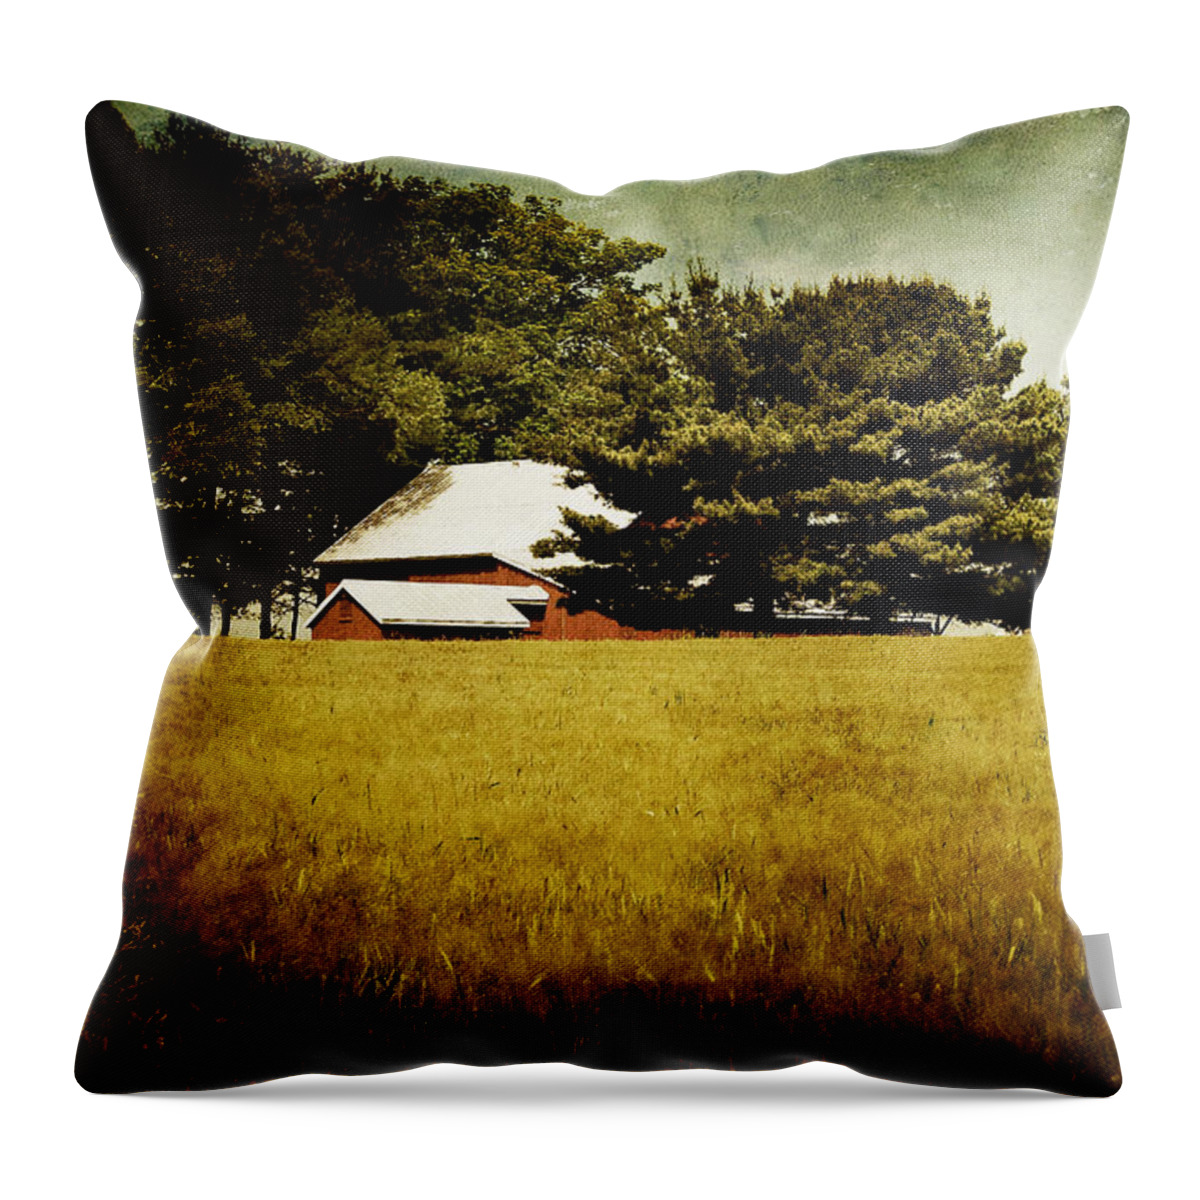 Barn Throw Pillow featuring the photograph Quiet by Lois Bryan